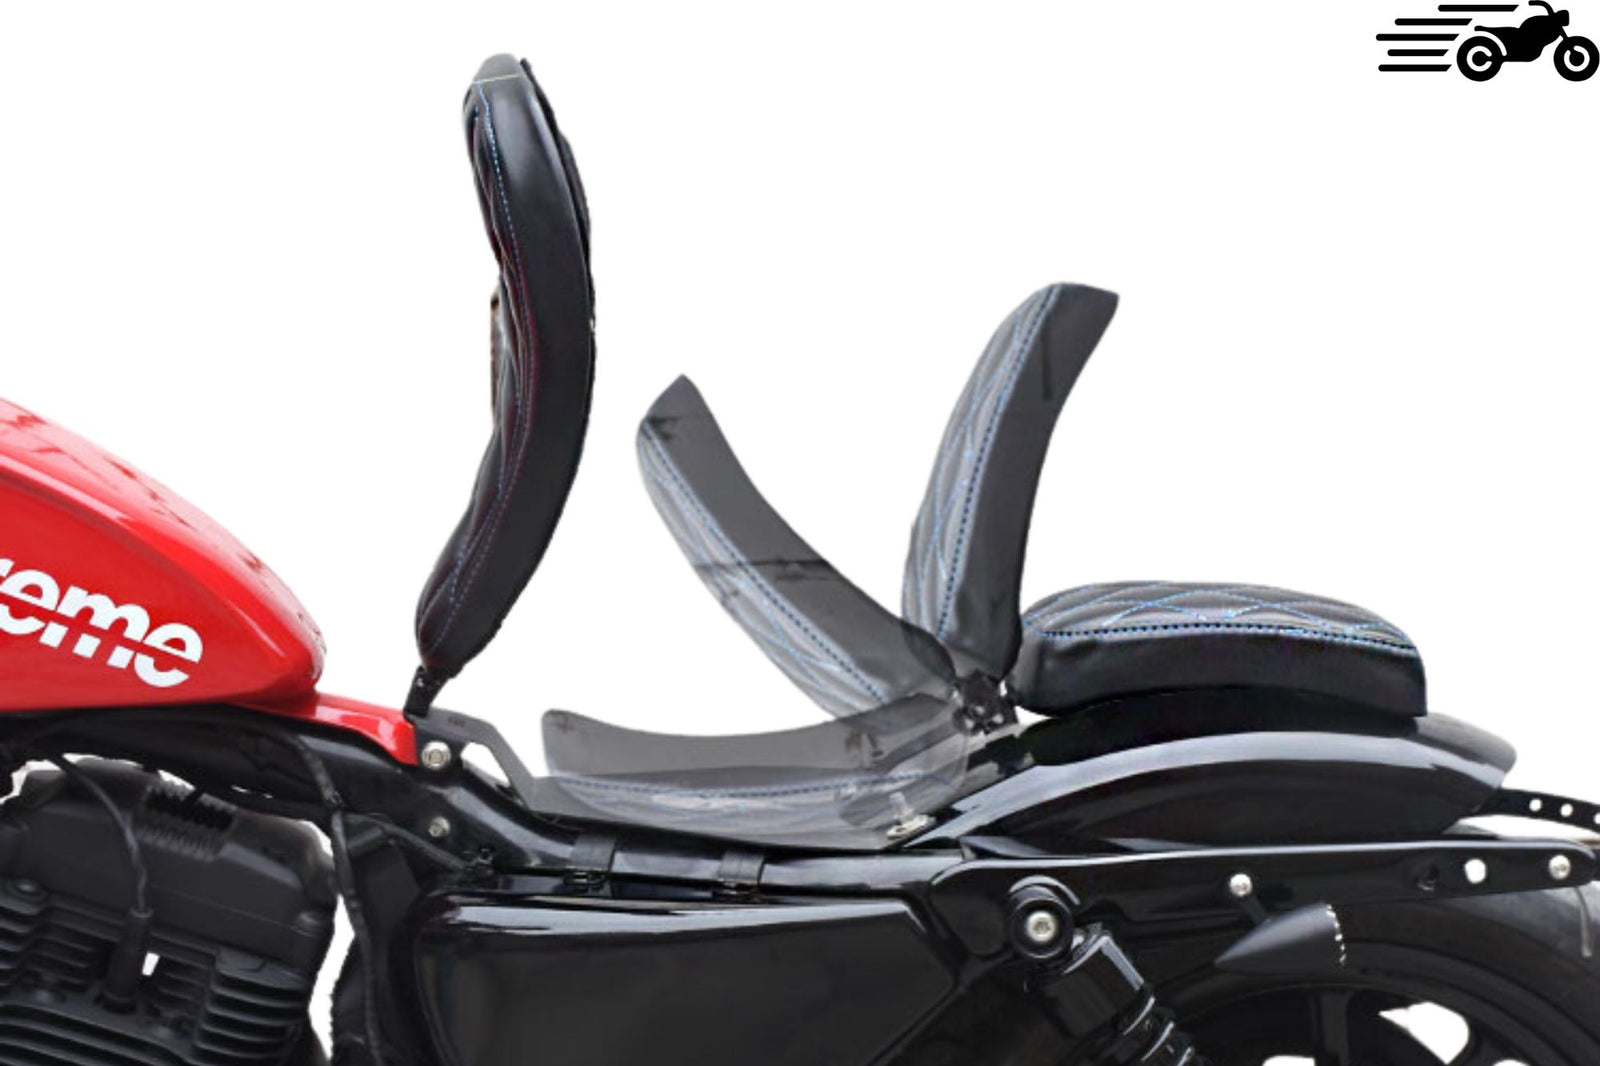 Solo Sportster Biplace Saddle